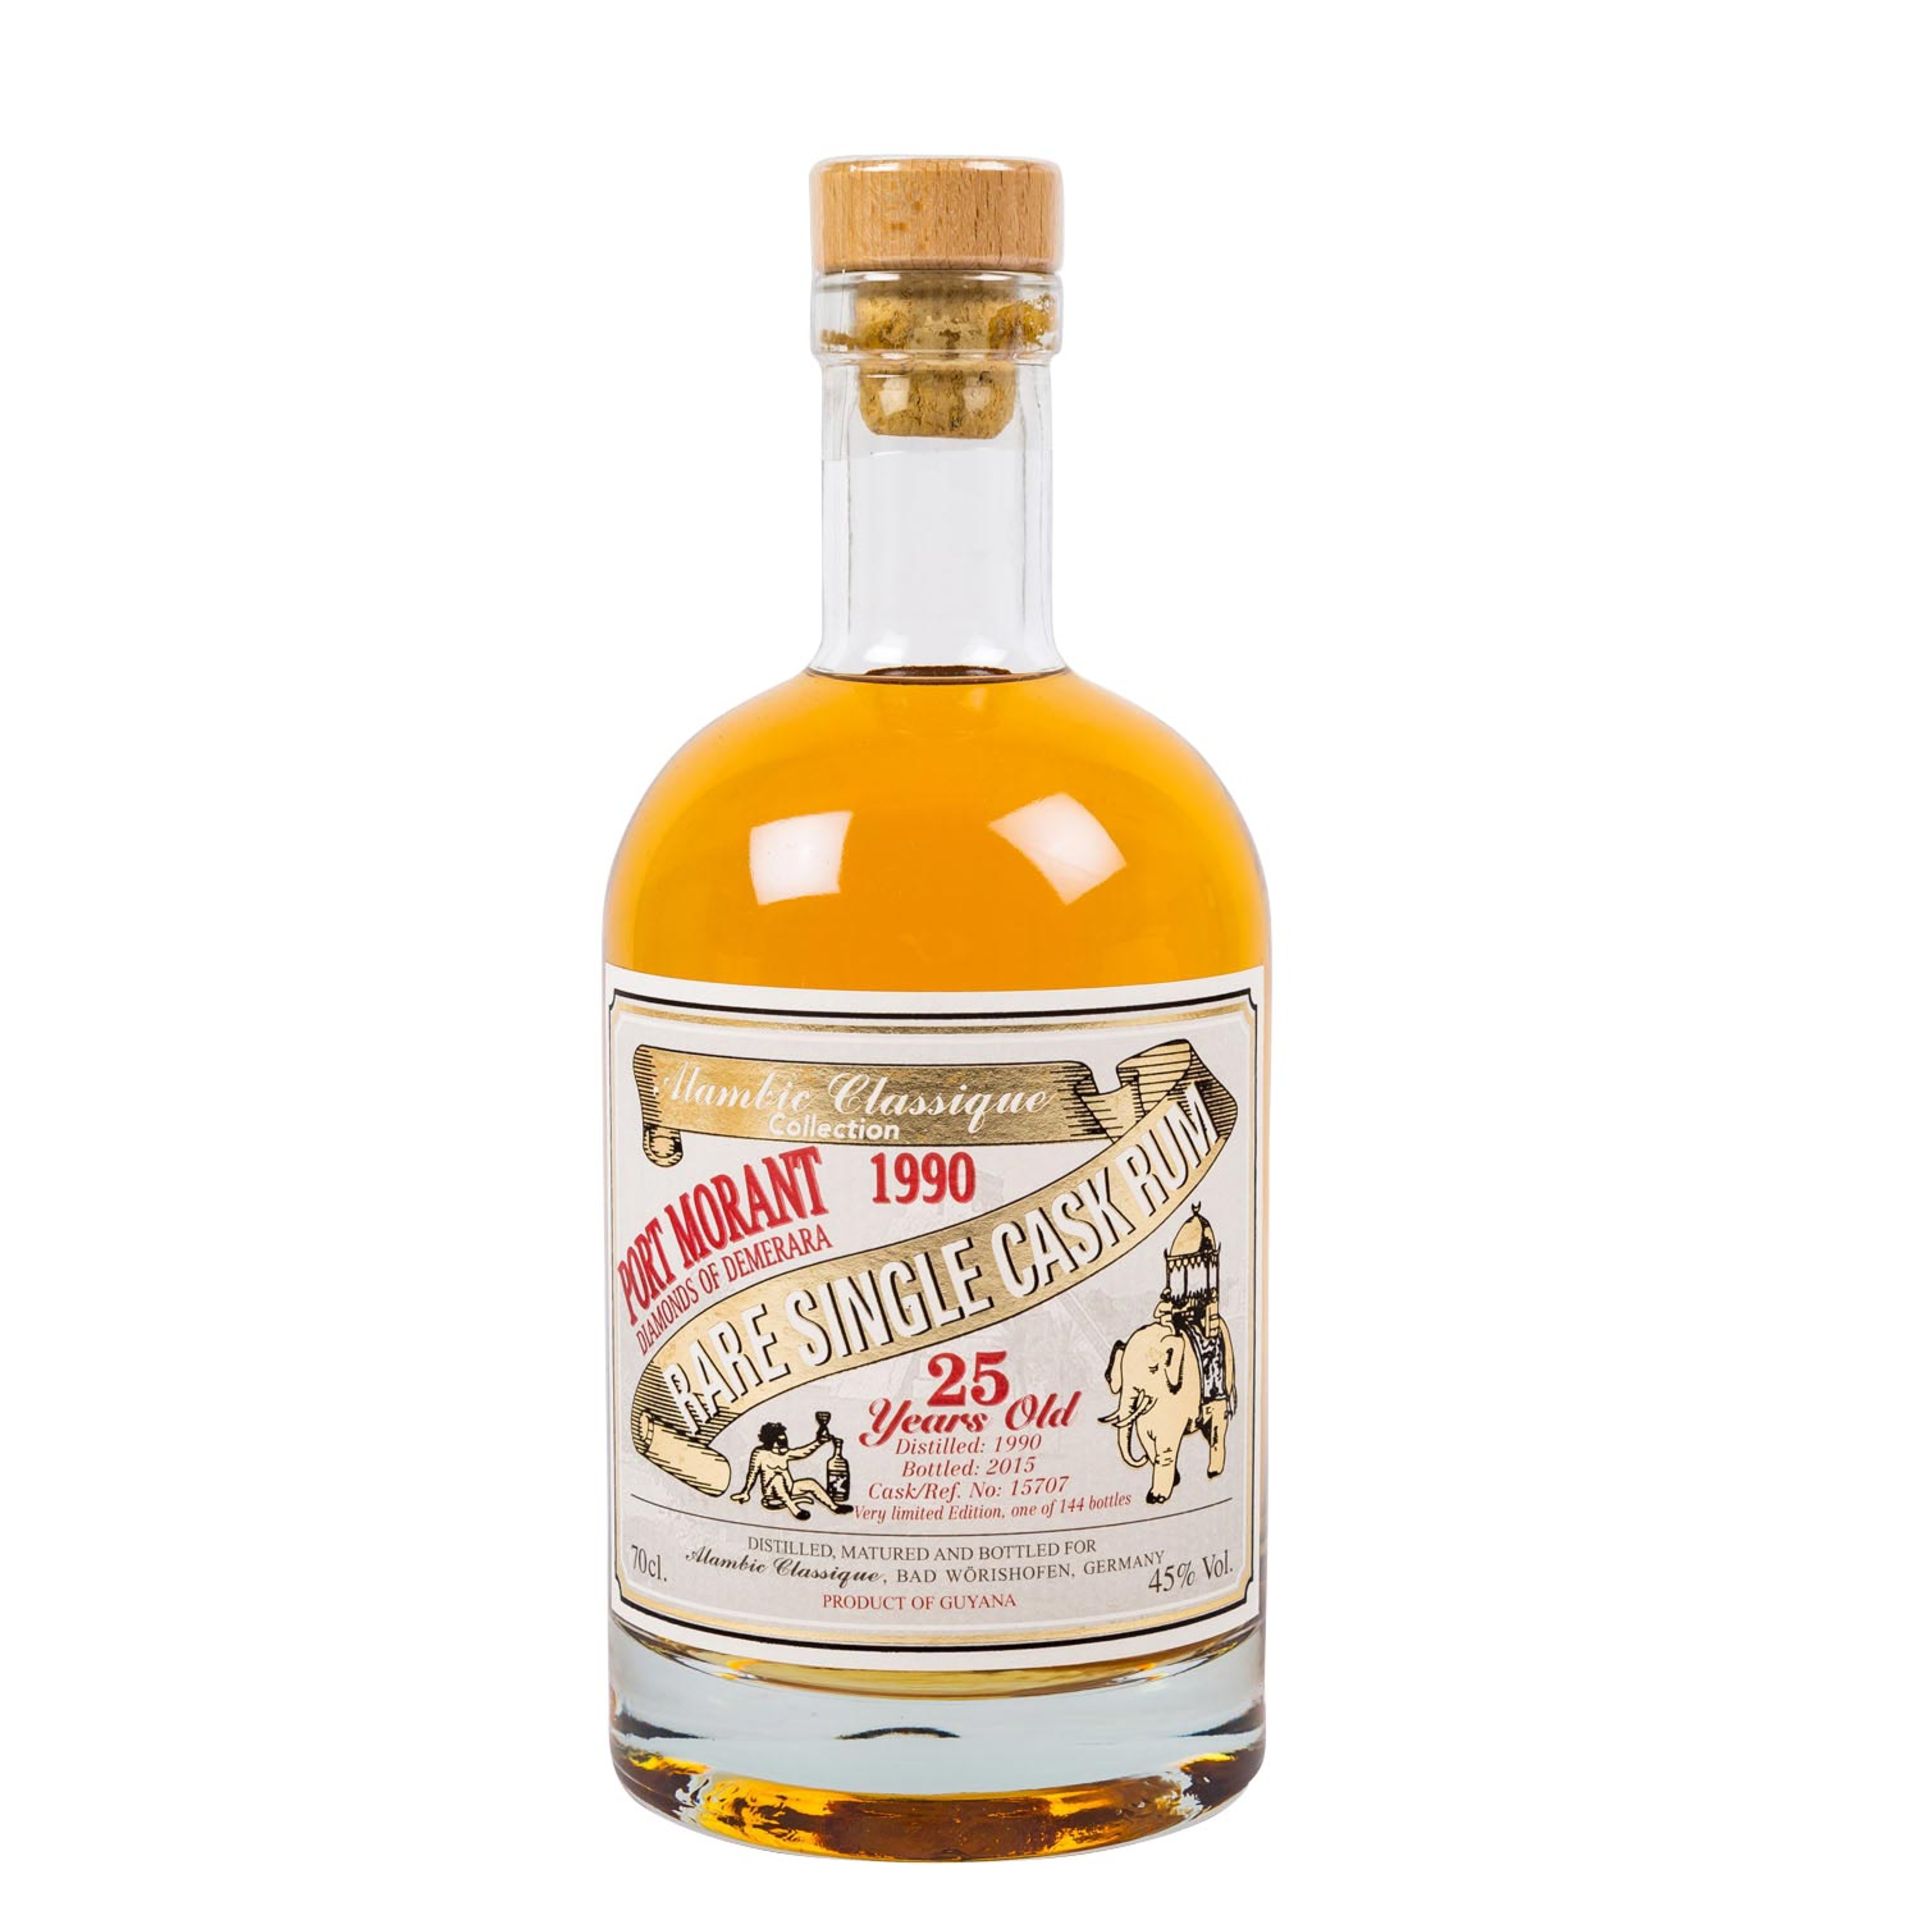 MAMBIE CLASSIQUE "25 Years Old" Rare Single Cask Rum 1990 - Image 2 of 5